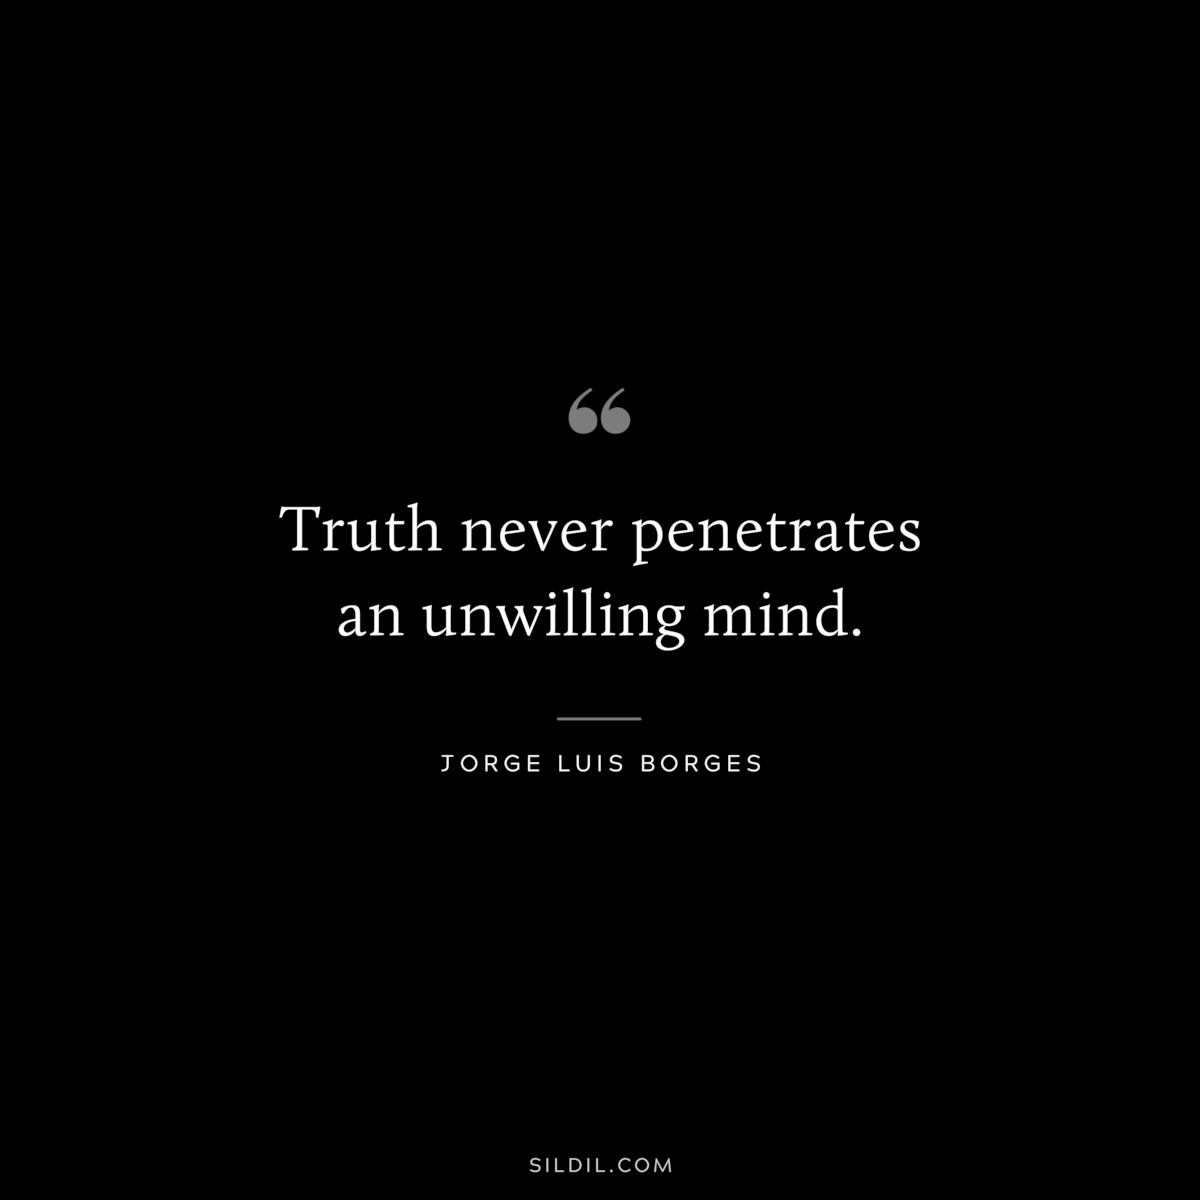 Truth never penetrates an unwilling mind. ― Jorge Luis Borges